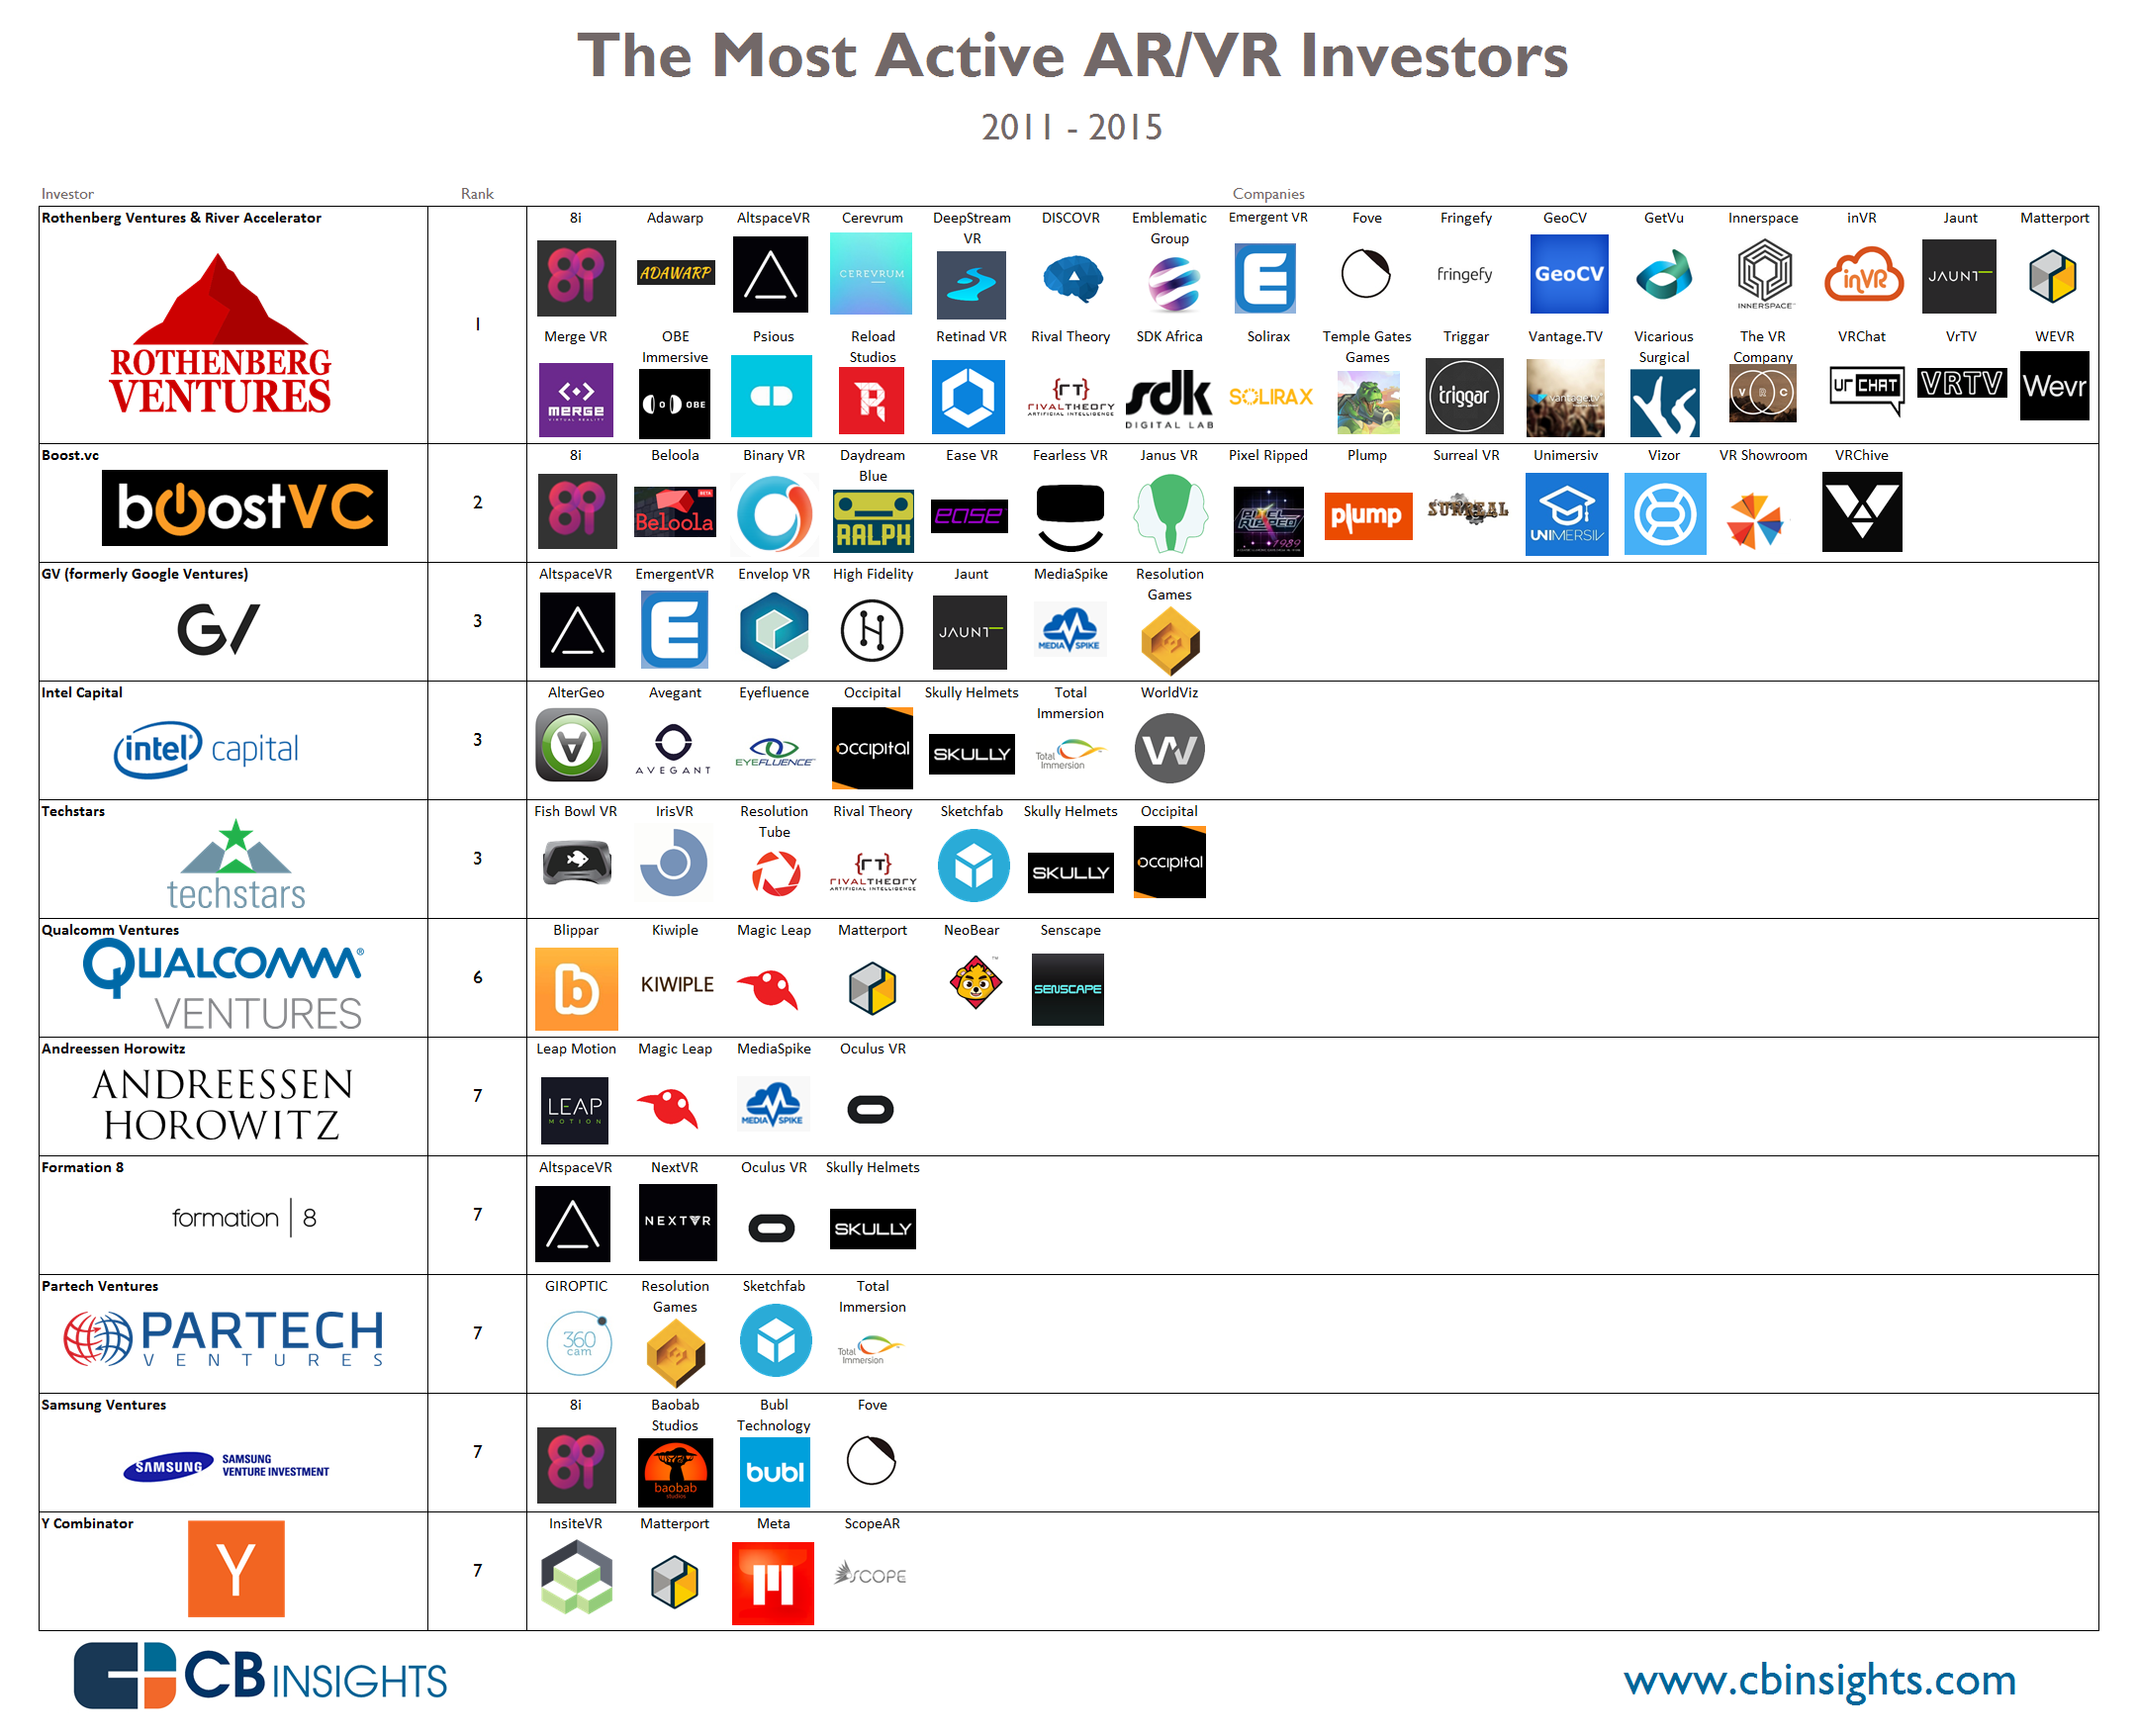 The most active VR and AR Investors 2011-2015